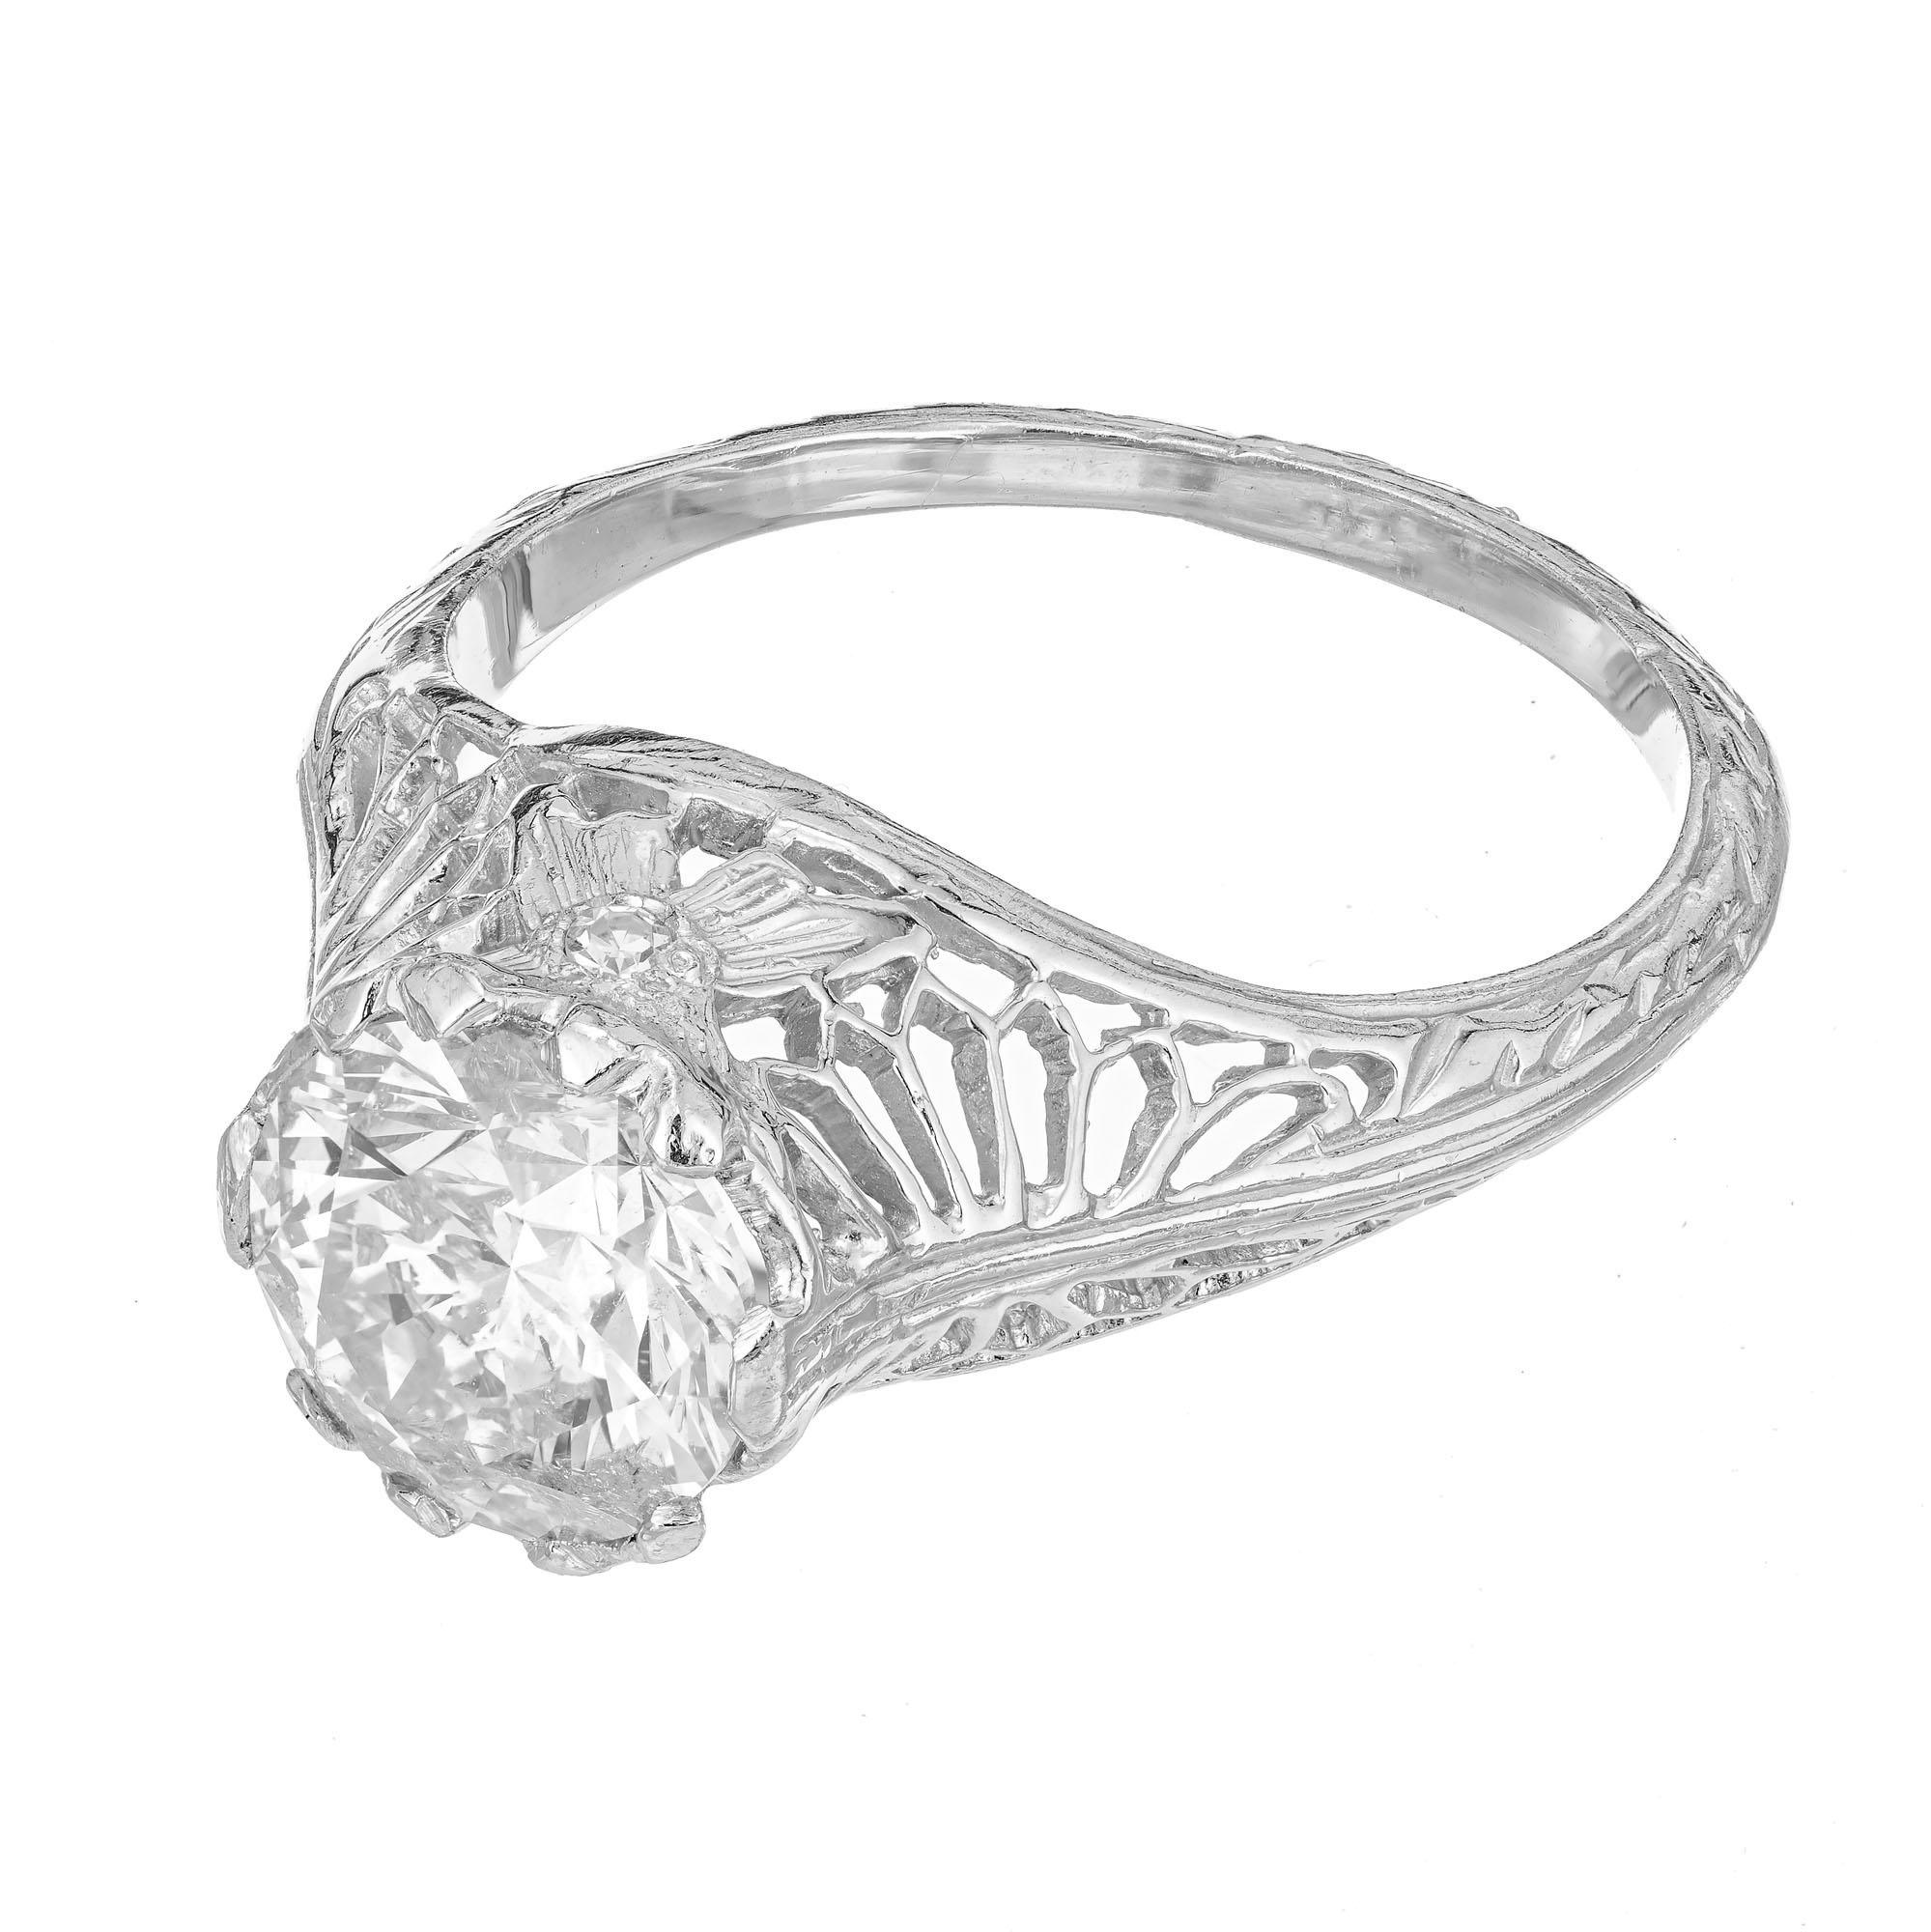 1940's transitional cut diamond engagement ring. Hand made platinum filigree, open scroll setting with and EGL certified 1.71ct center stone accented with 2 single cut diamonds. 

1 Ideal transitional cut brilliant diamond, approx. total weight